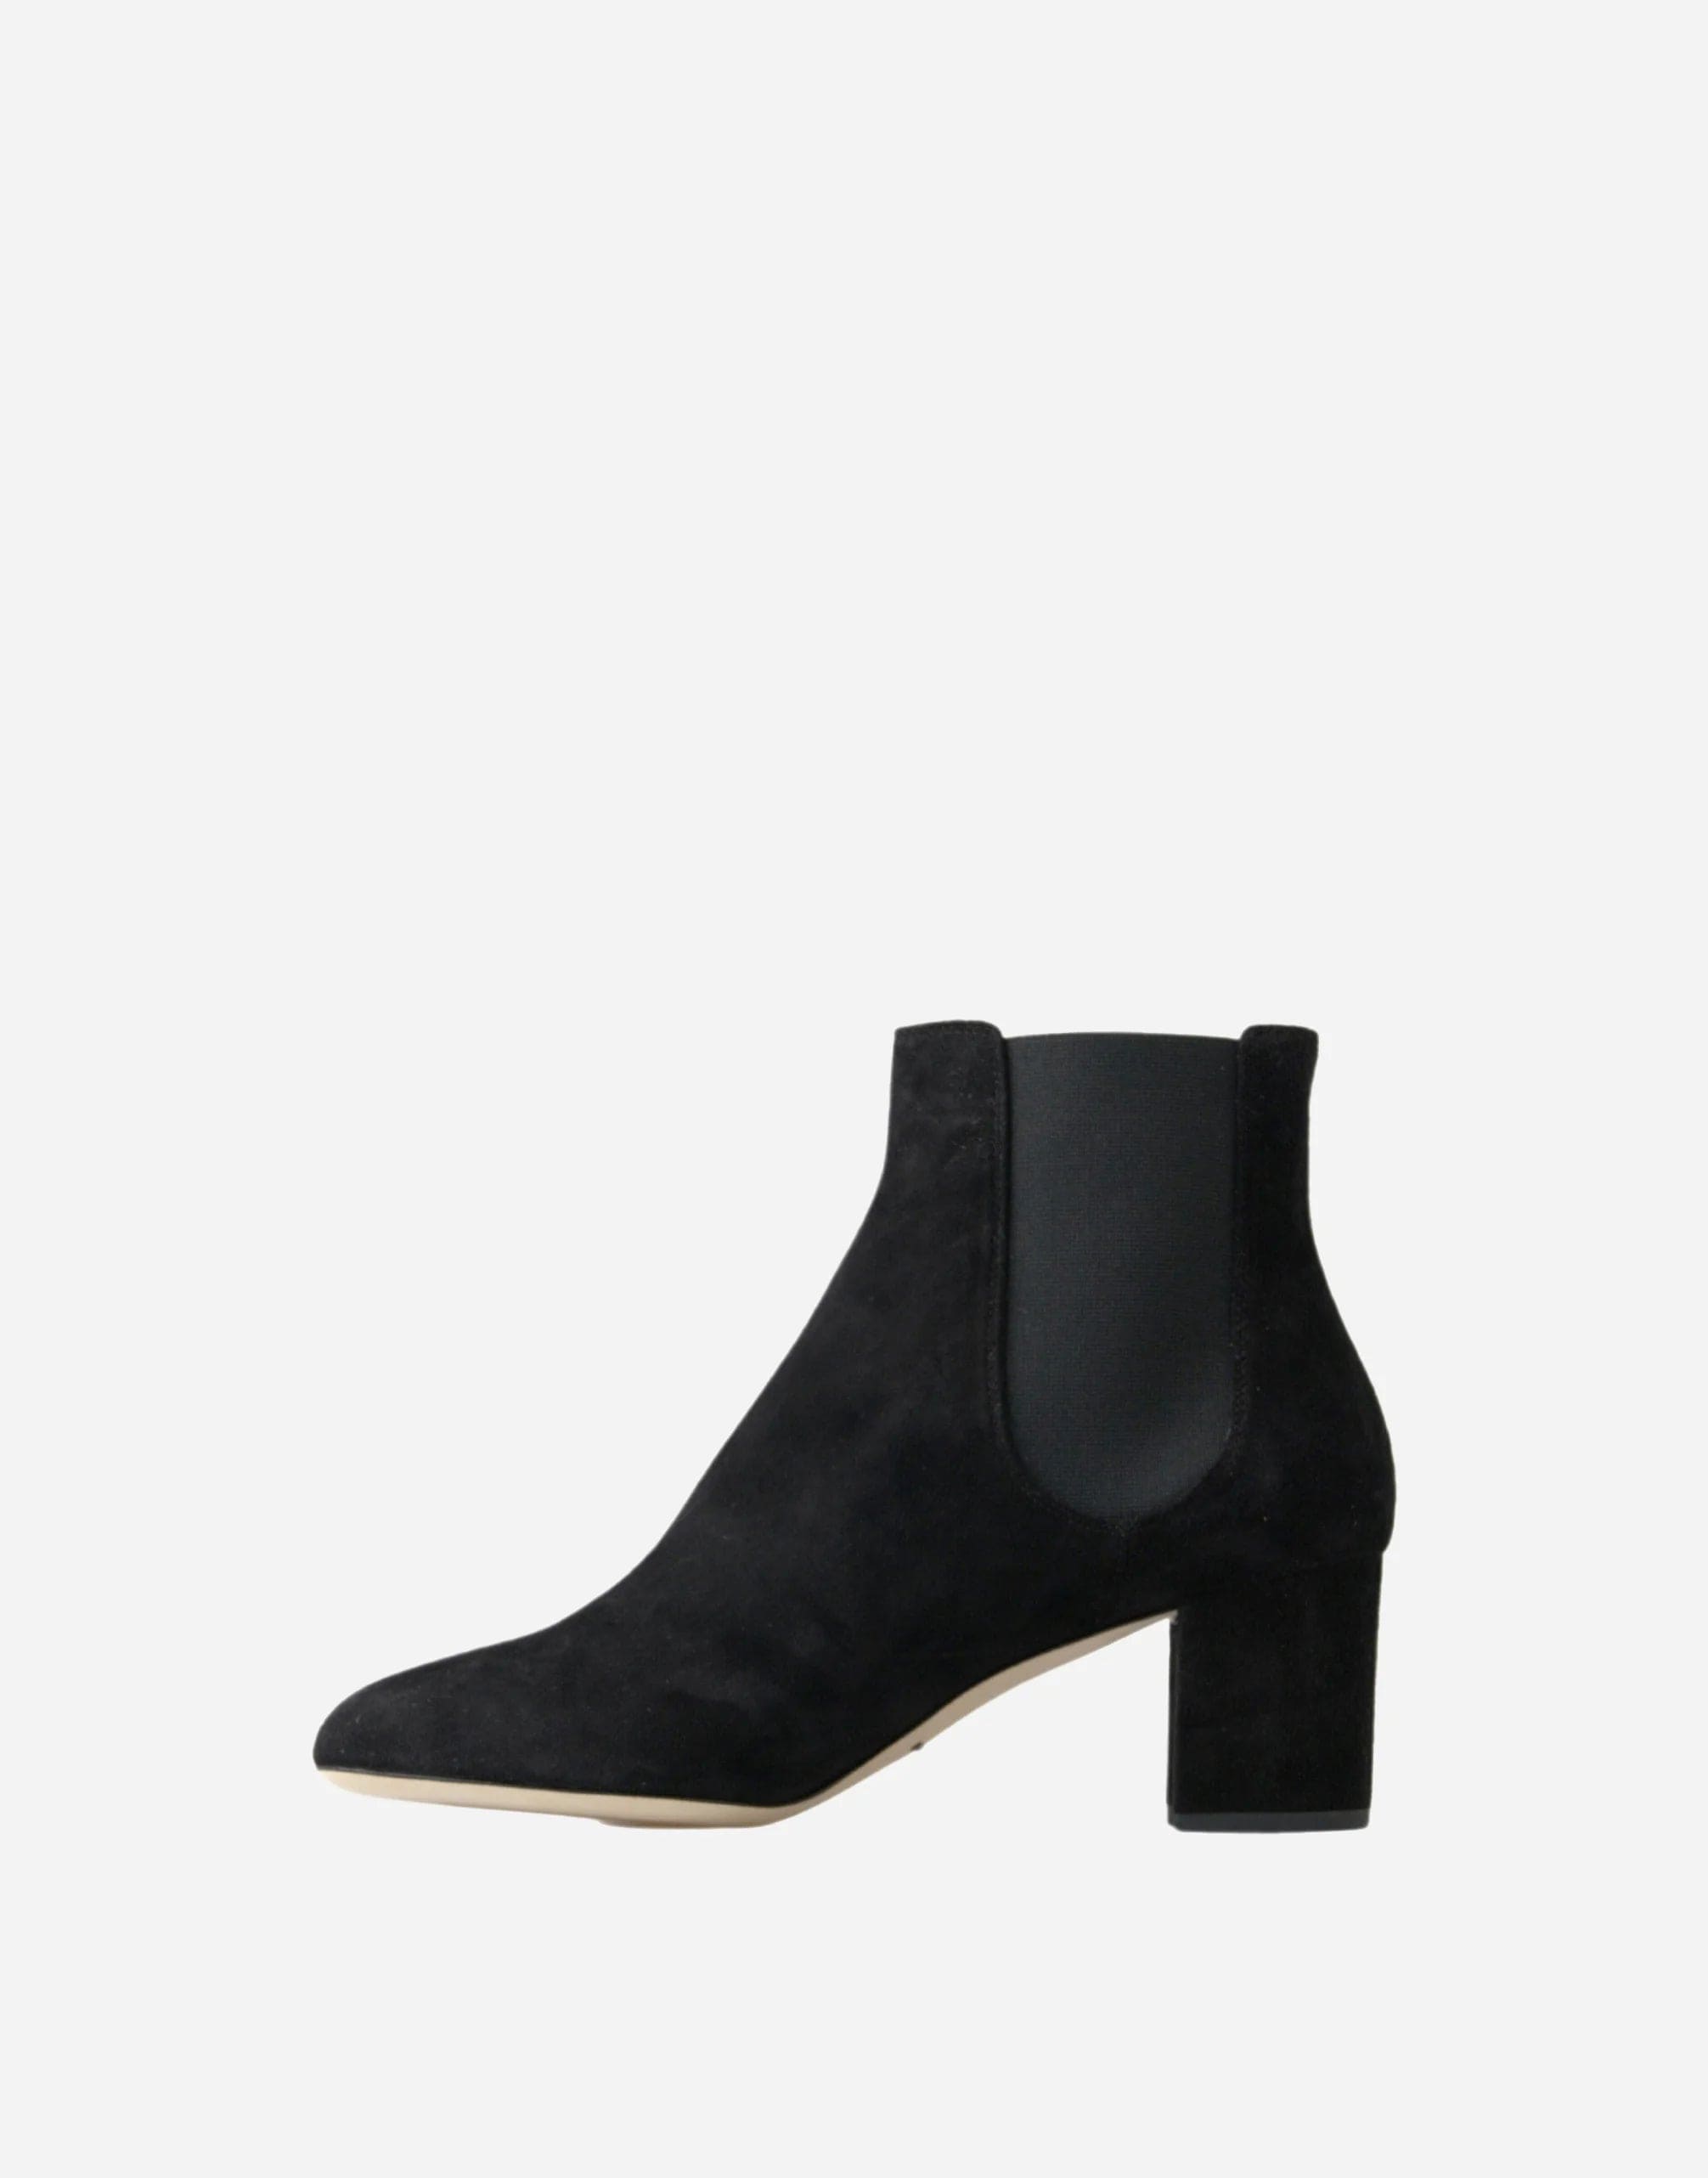 Dolce & Gabbana Stretch Ankle Boots